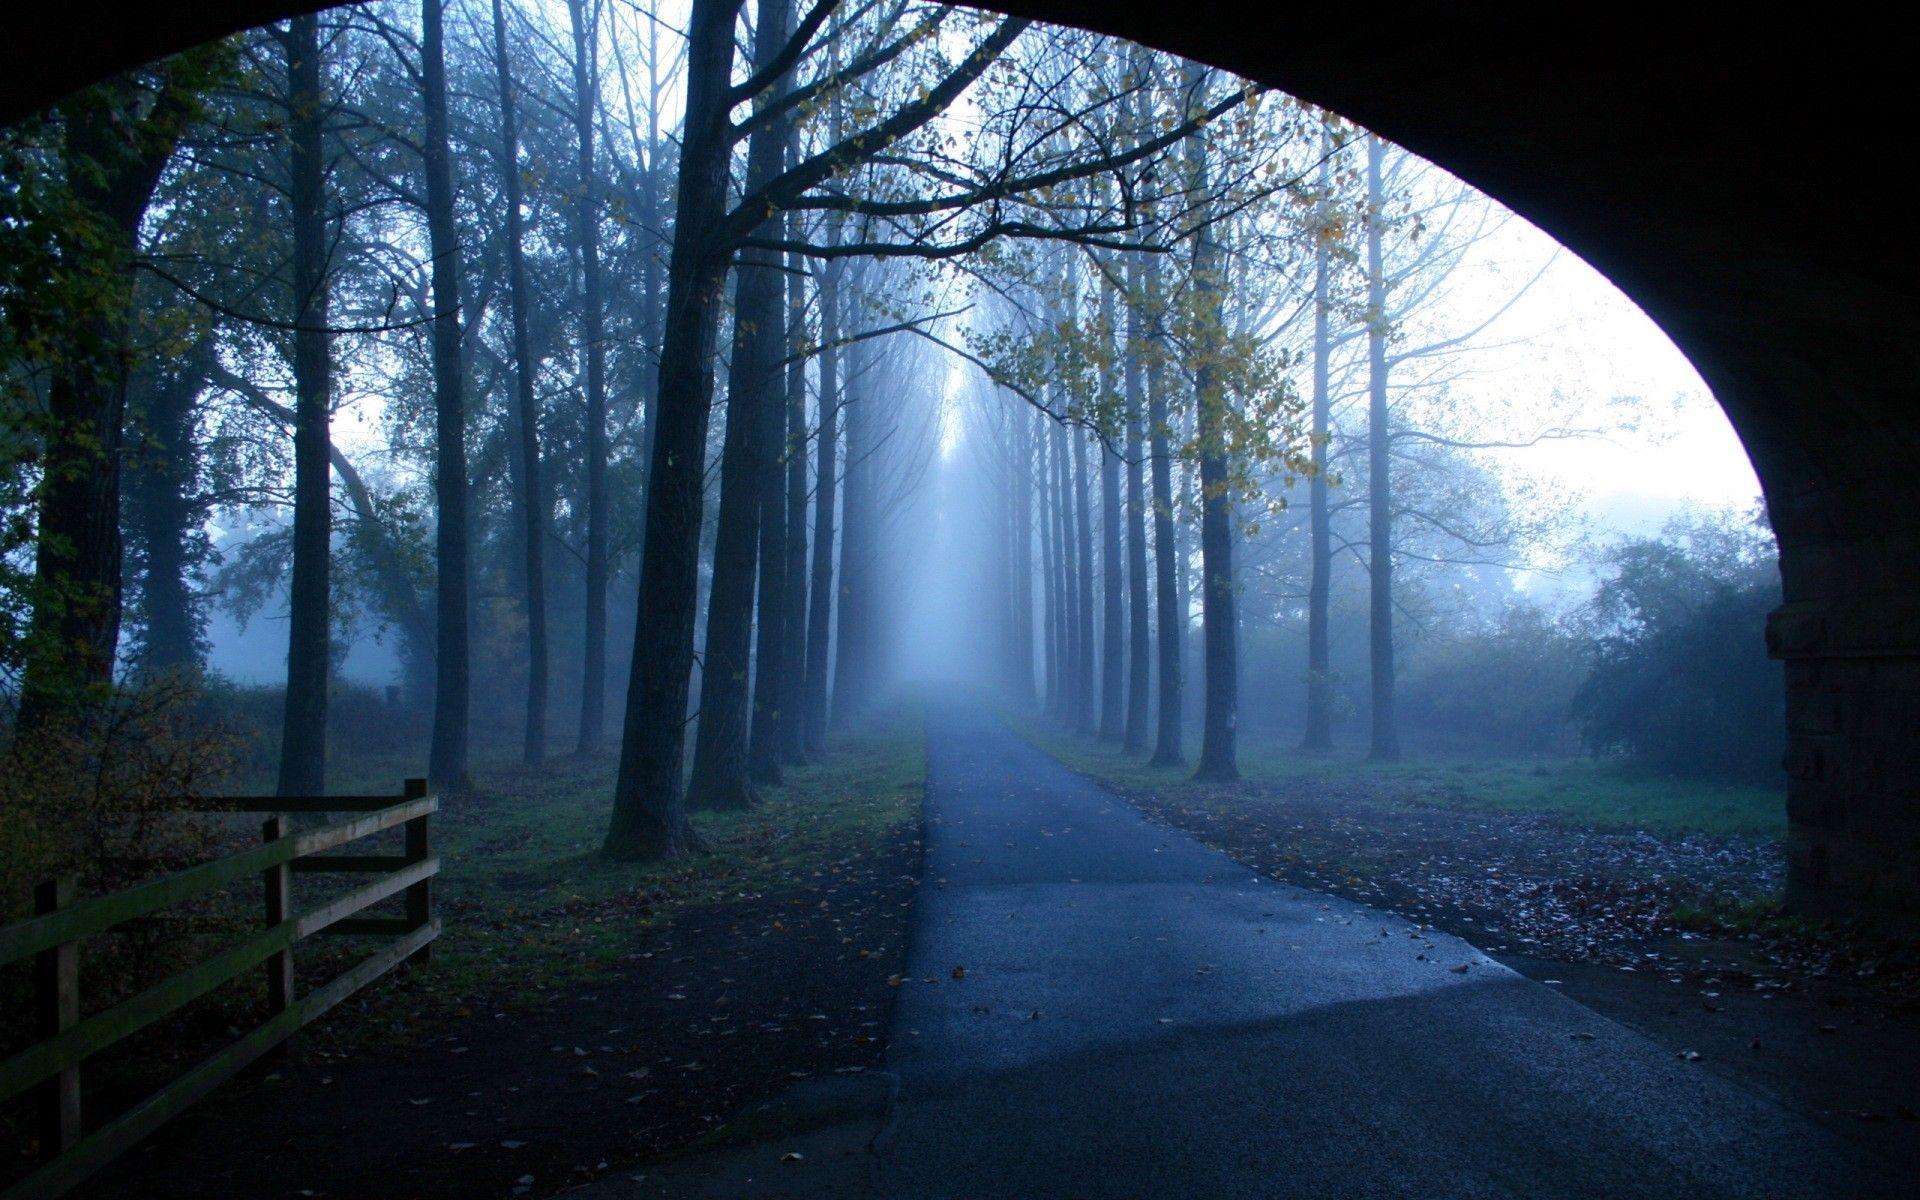 Other Tunnel Alley Trees Mist Outside Wide Rows Road Wallpaper